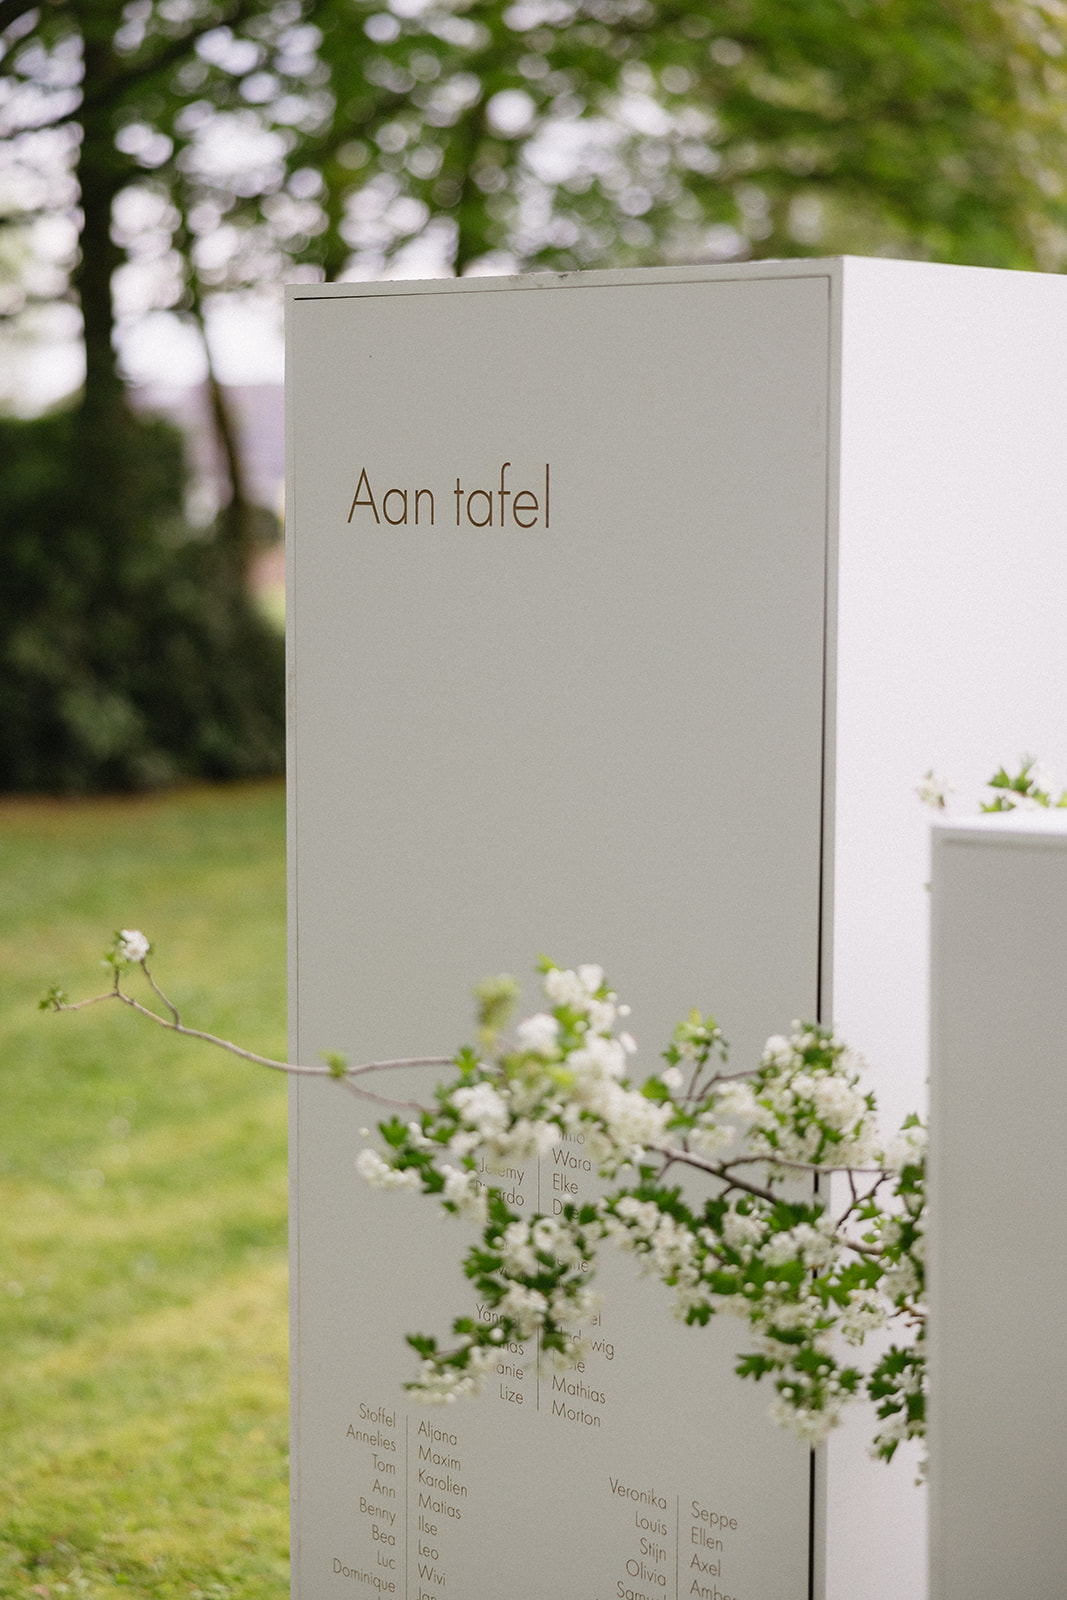 Beautifully designed wedding signage adding a touch of sophistication